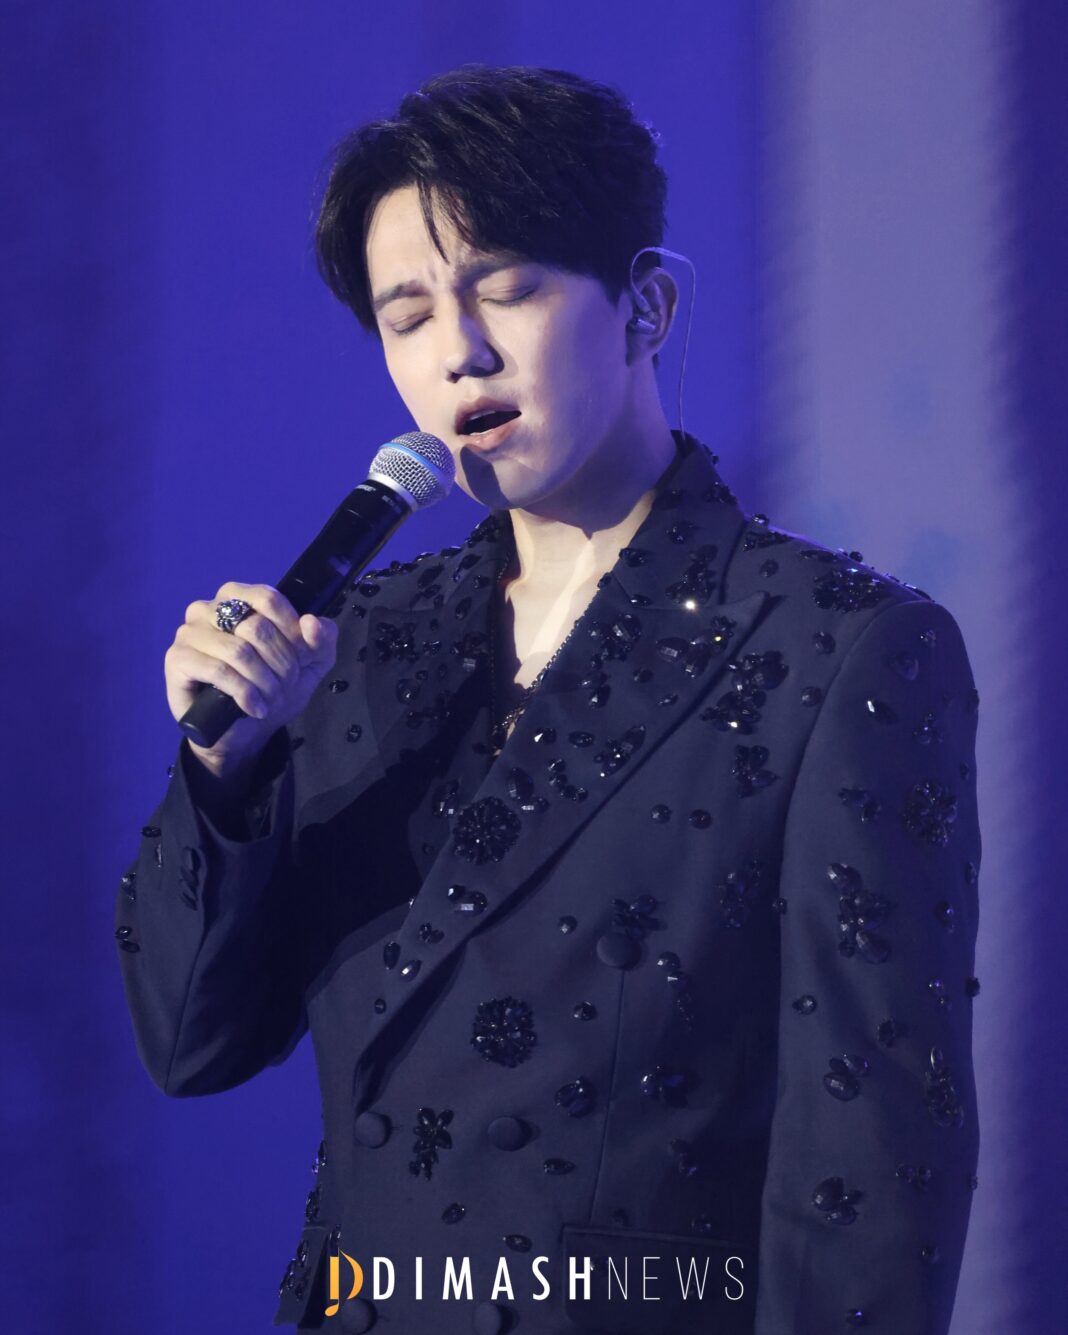 Dimash performed at the Gala concert of the World Youth Festival in Tashkent